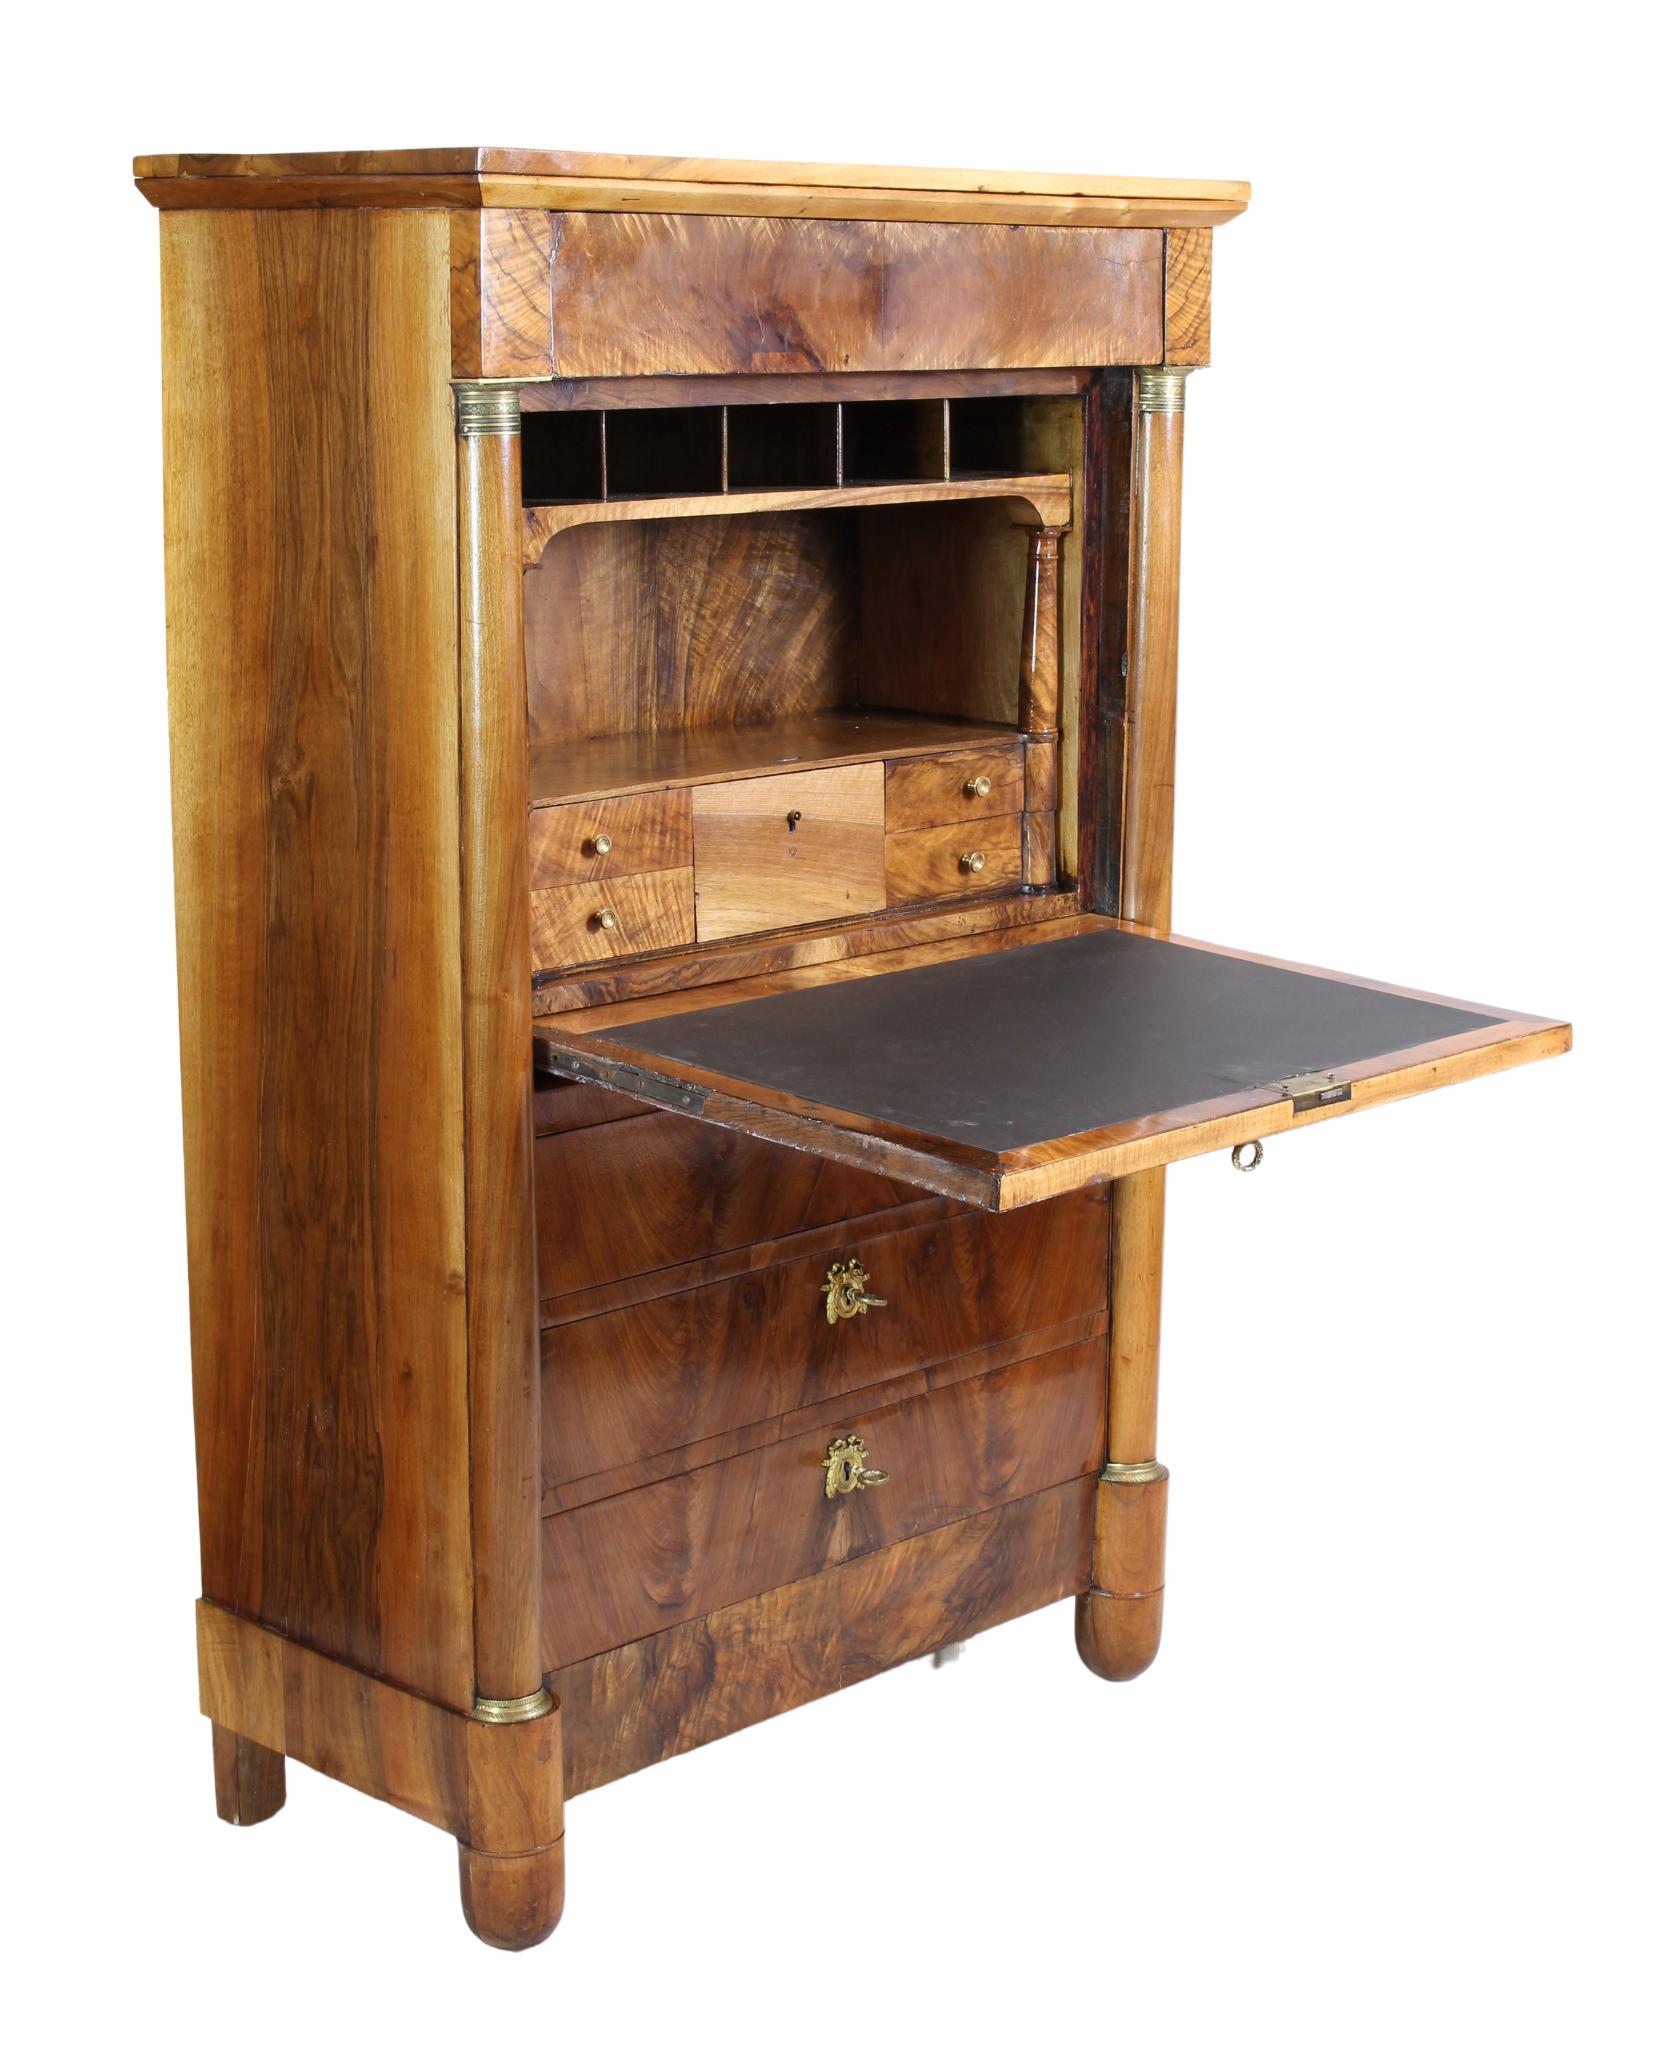 A beautiful small secretary made of walnut veneer and solid walnut from the Biedermeier / Empire period at the beginning of the 19th century. The secretary is covered on the outside with a beautiful walnut veneer pattern and made of solid walnut on